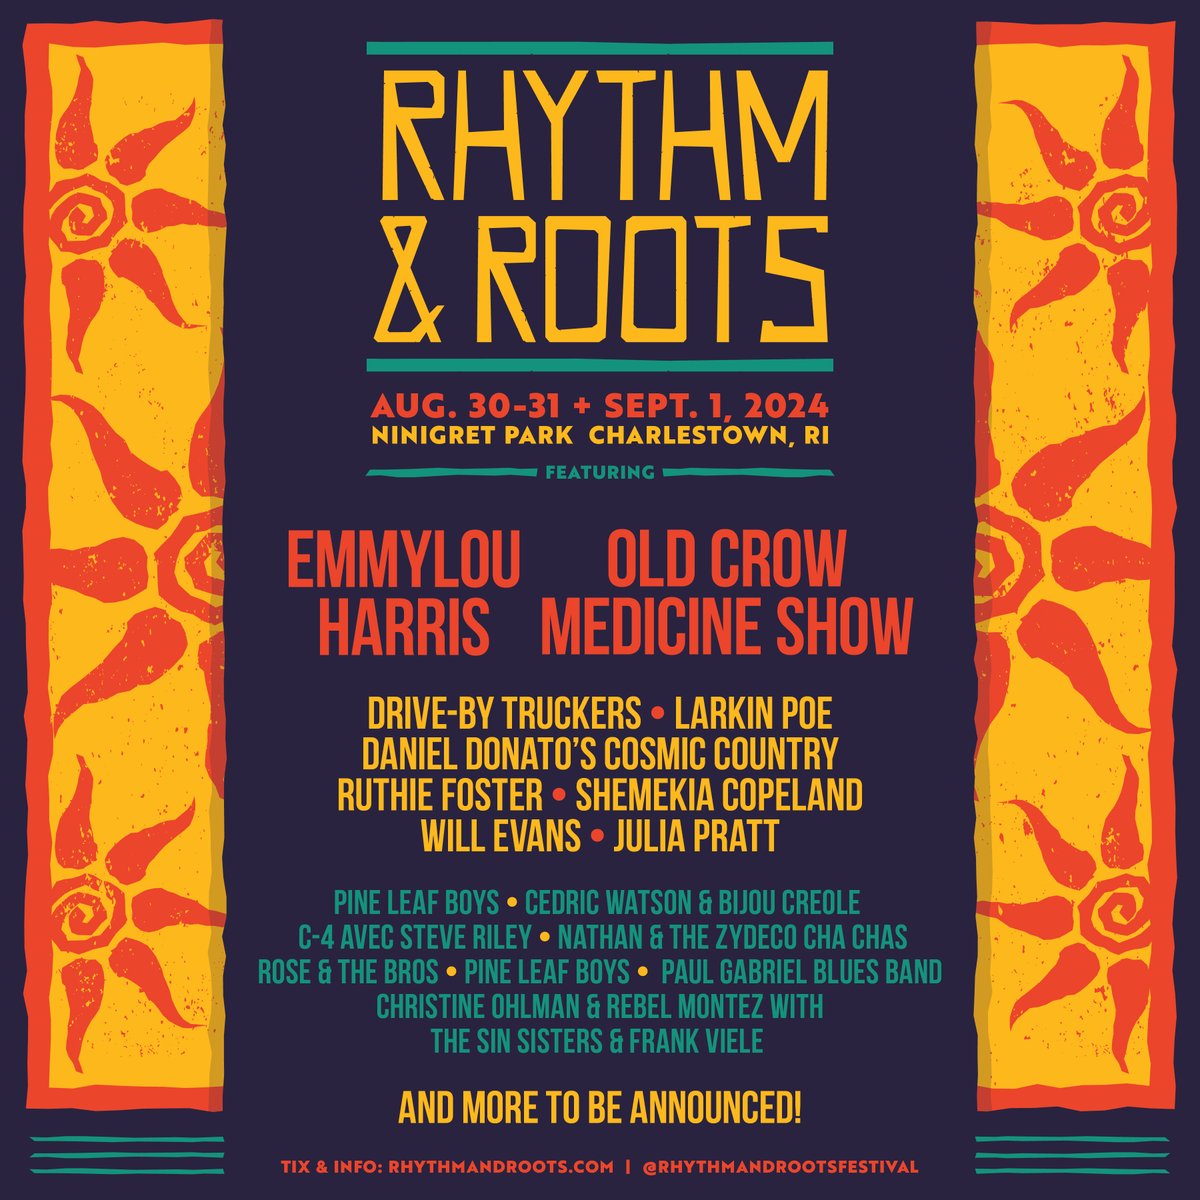 Just announced! Get your tickets to see Emmylou at @RRFestival here rhythmandroots.com!